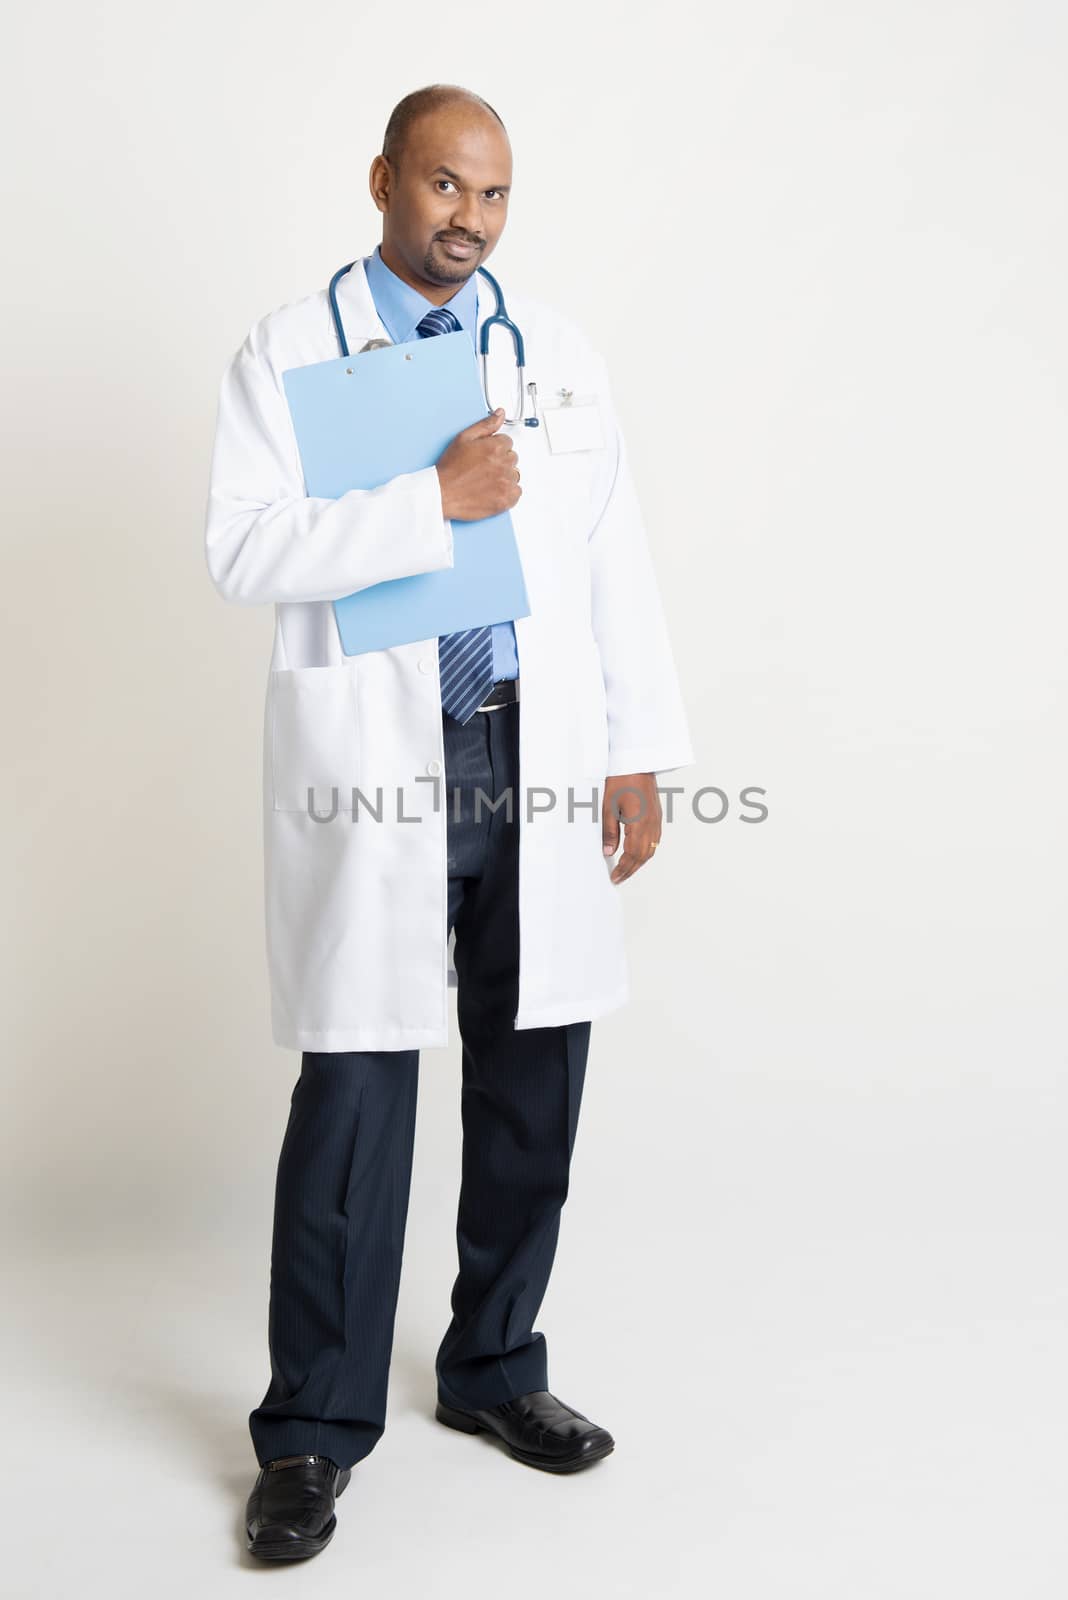 Full length mature Indian male medical doctor in uniform holding medical report folder, standing on plain background with shadow.